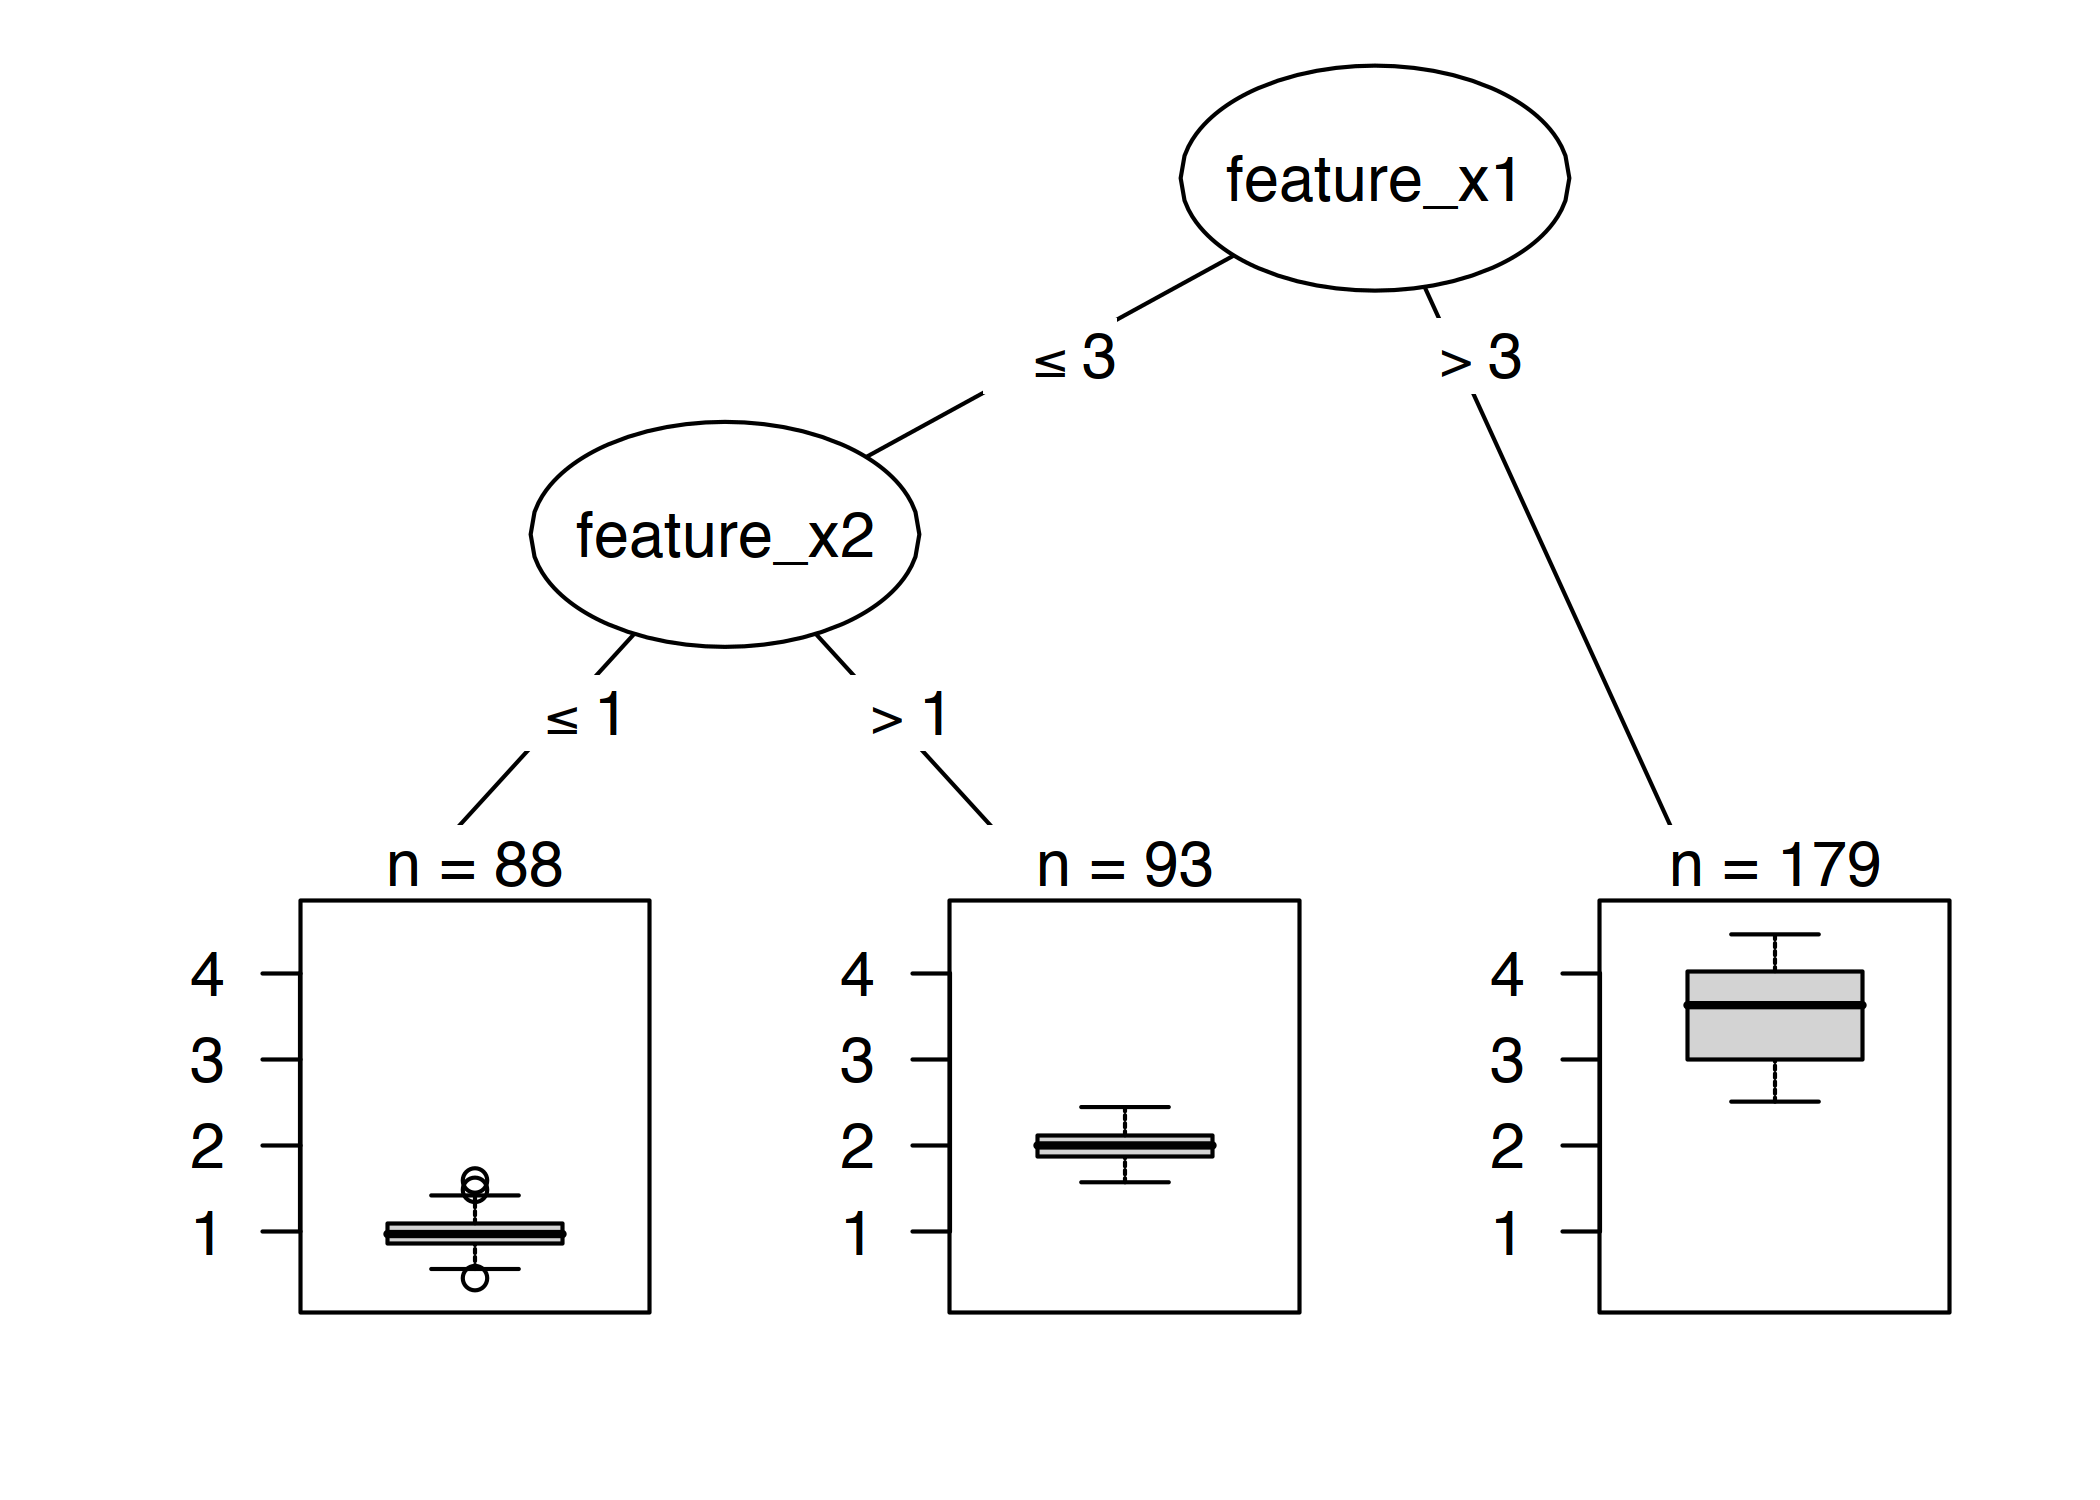 Decision tree with artificial data. Instances with a value greater than 3 for feature x1 end up in node 5. All other instances are assigned to node 3 or node 4, depending on whether values of feature x2  exceed 1.